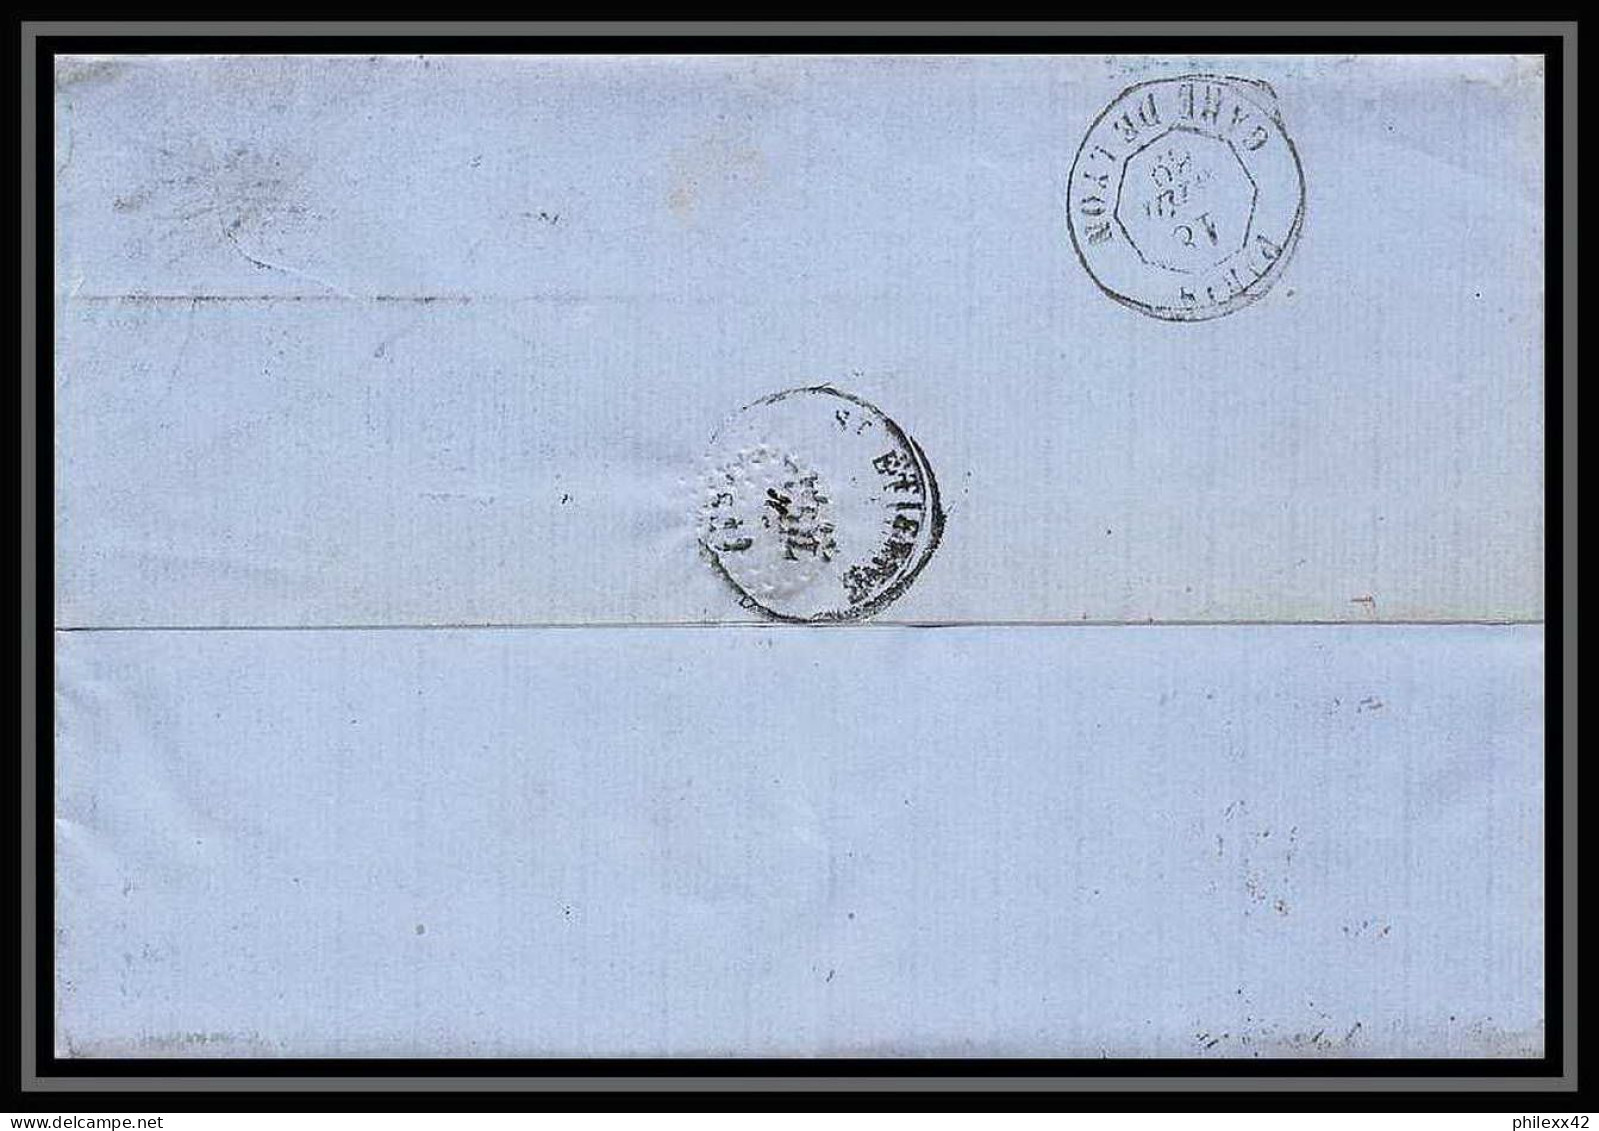 35828 N°32 Victoria 4p Red London St Etienne France 1869 Cachet 99 Lettre Cover Grande Bretagne England - Covers & Documents